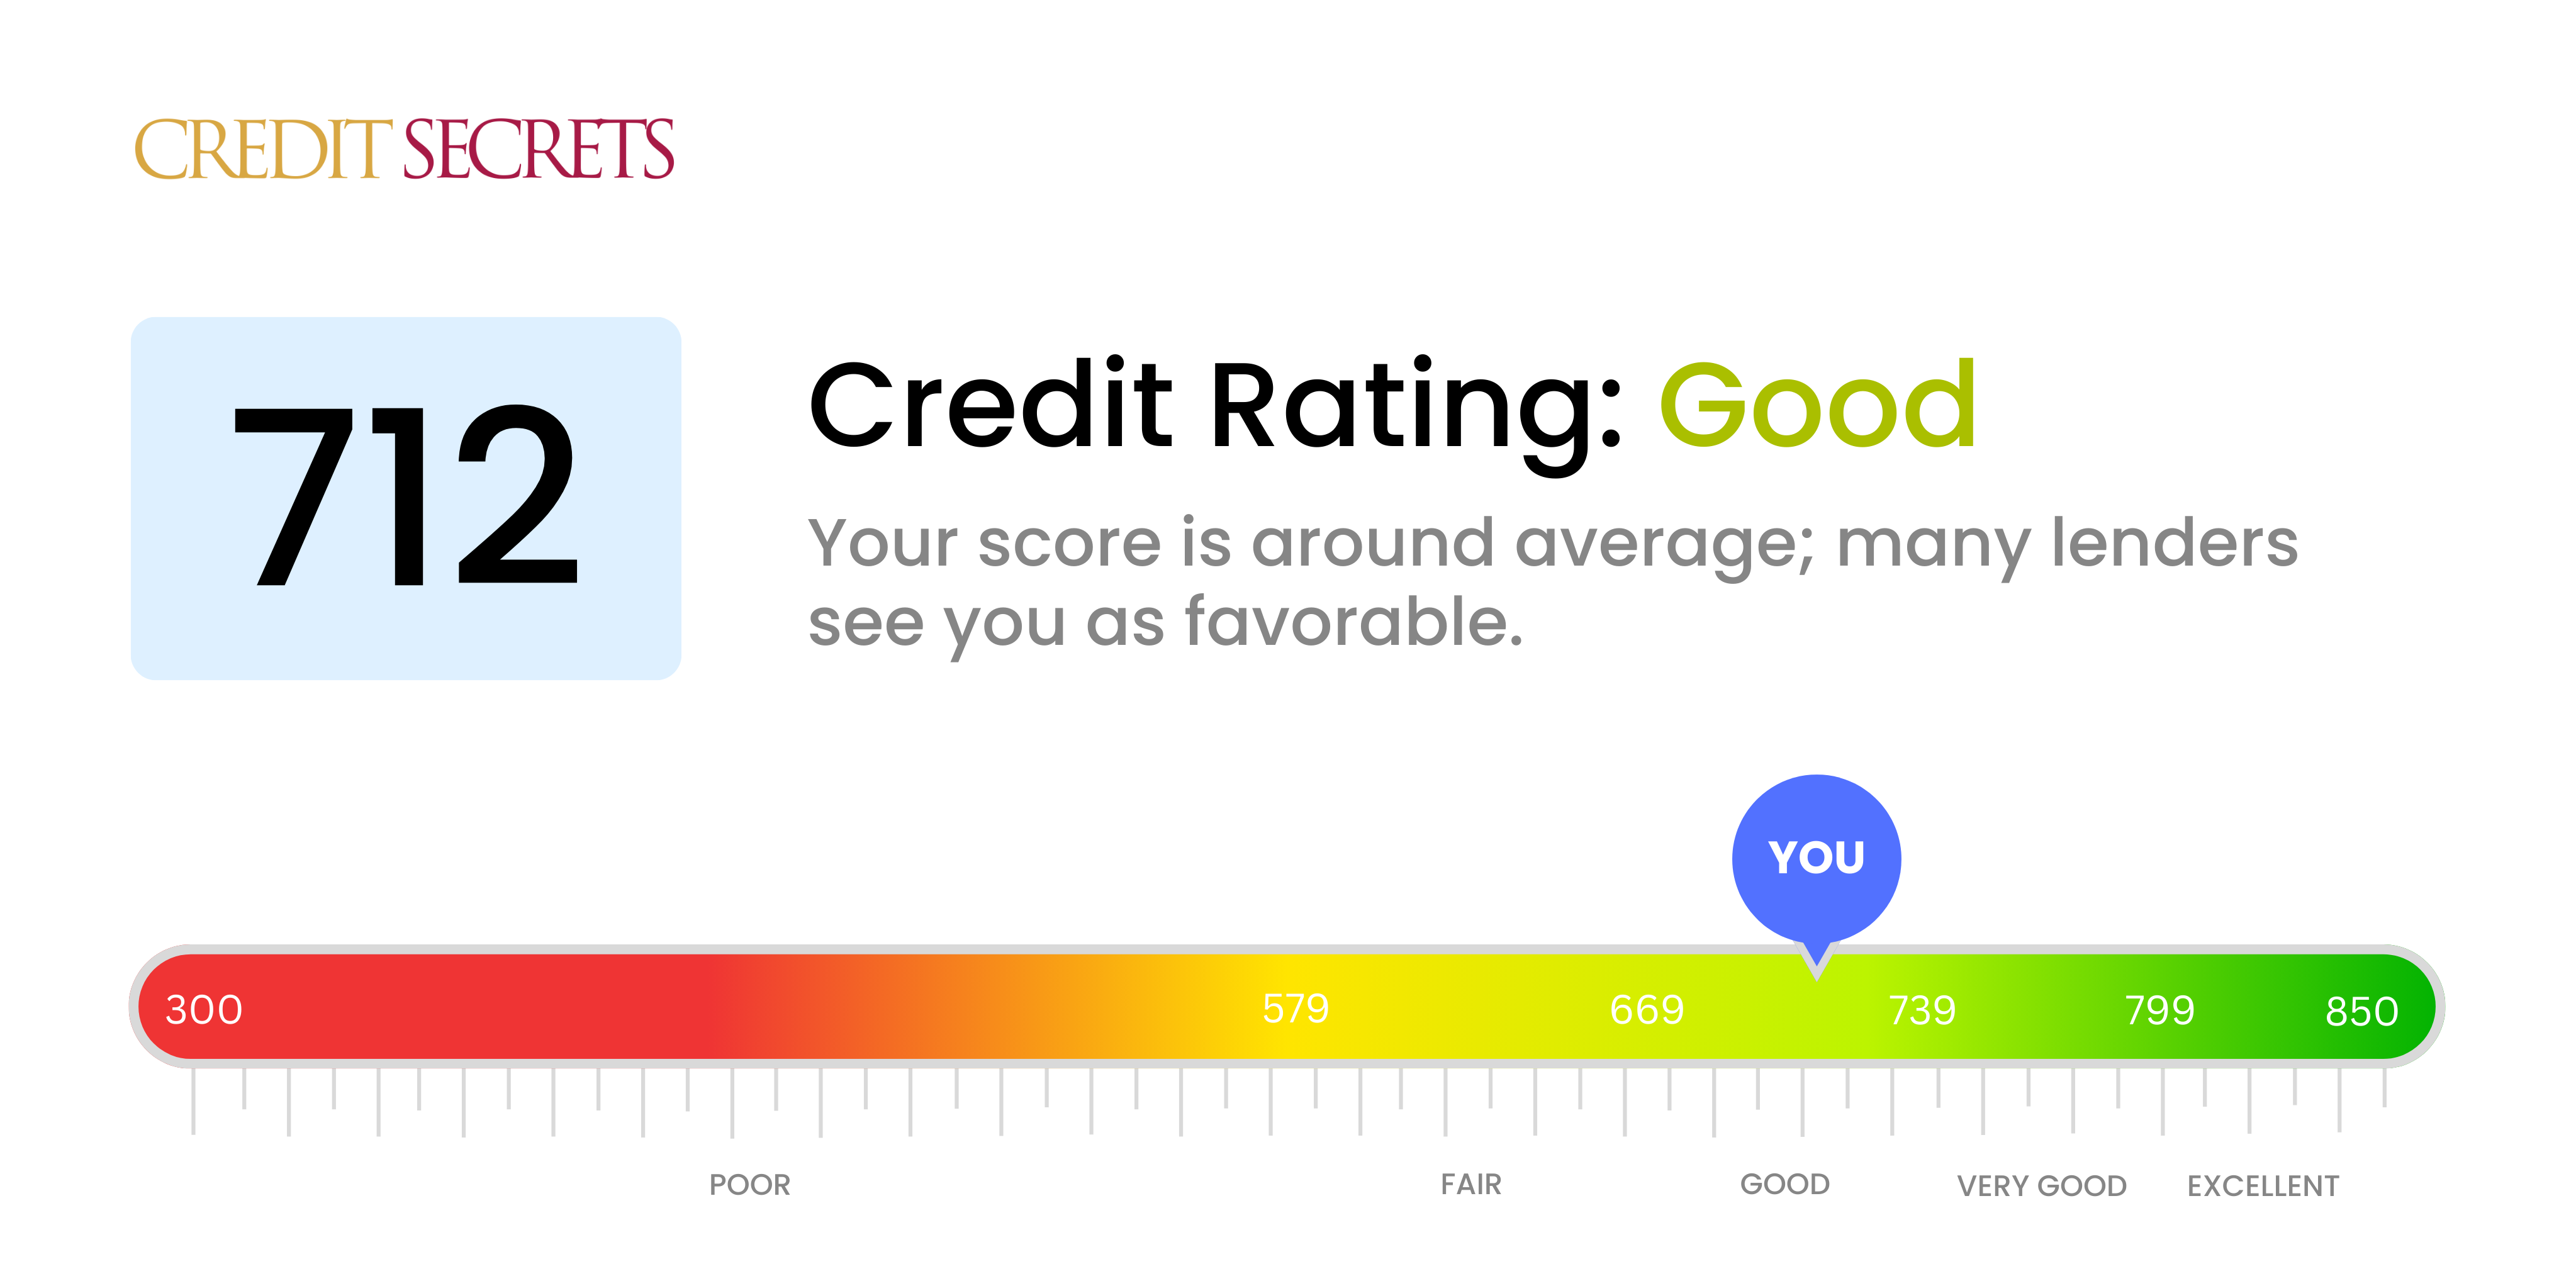 Is 712 a good credit score?